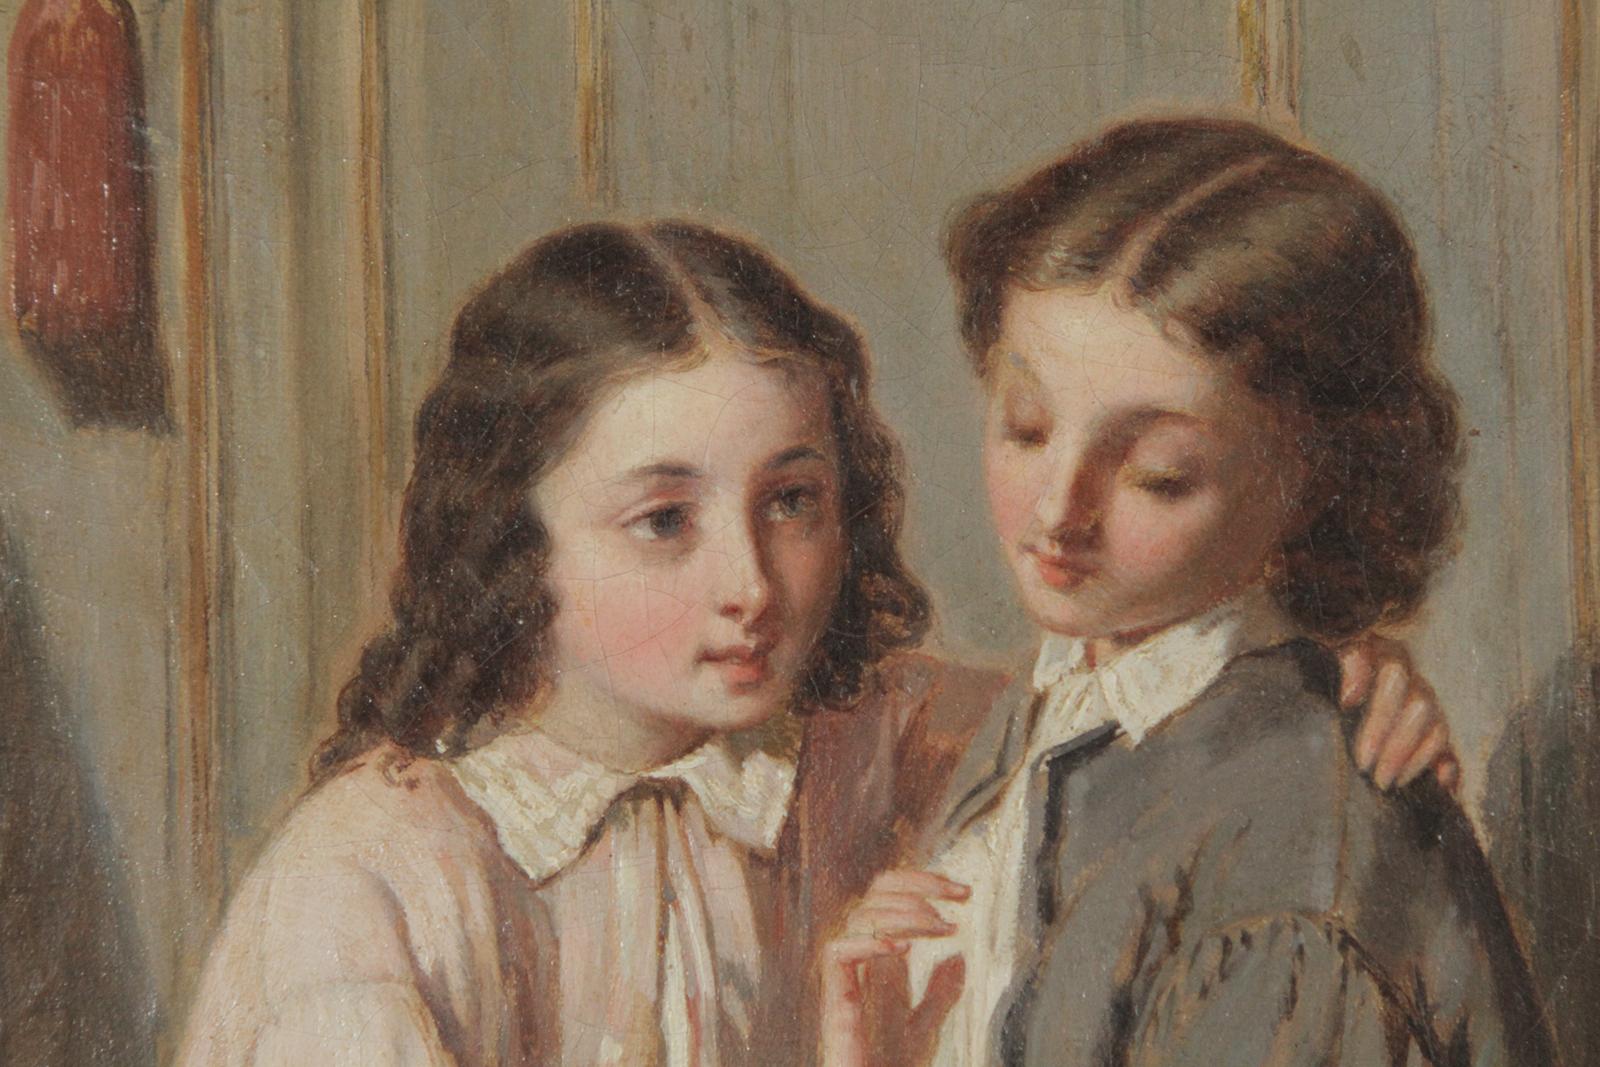 Original oil on canvas interior scene Two Young Women Sharing A Secret, Mid 1800s.
Dimensions: 18” W x 21.5” H x 1.5 D image 12.25